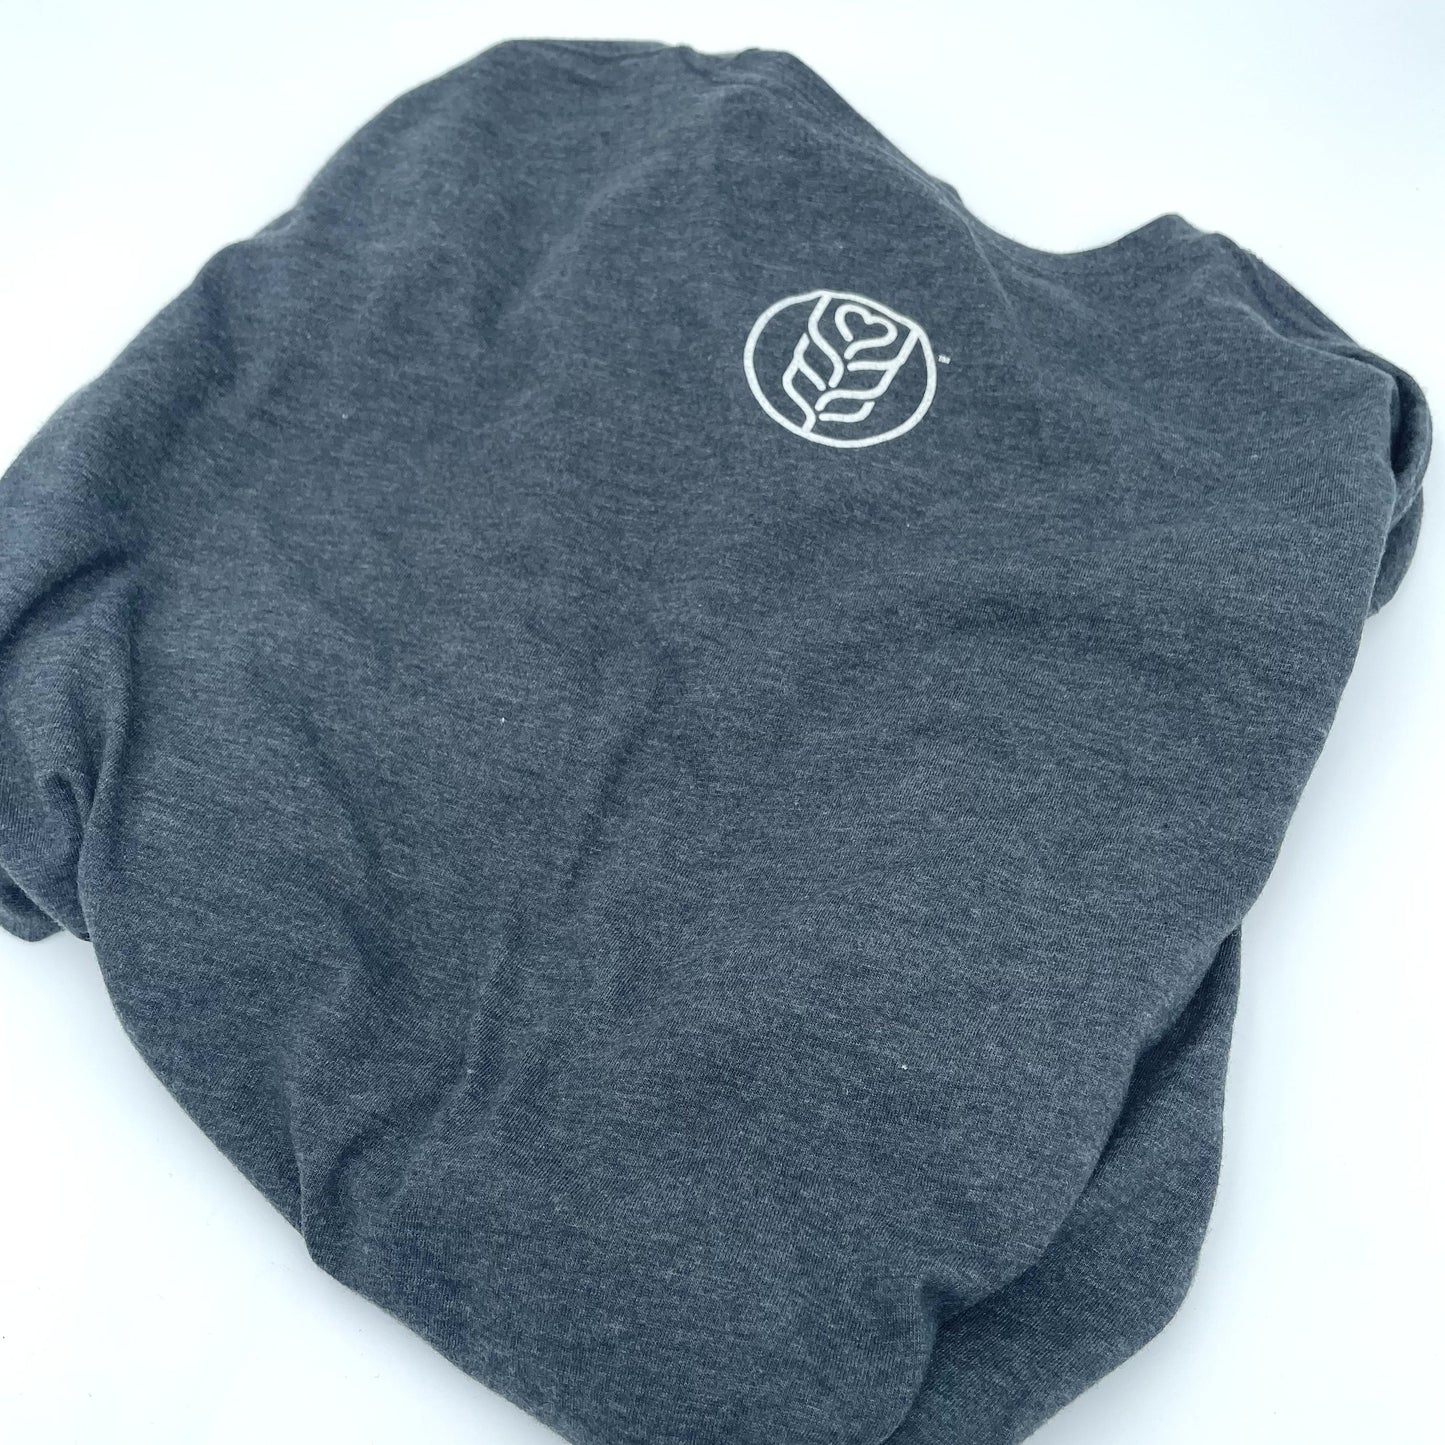 Charcoal Shirt with Parchment Logos - Women's